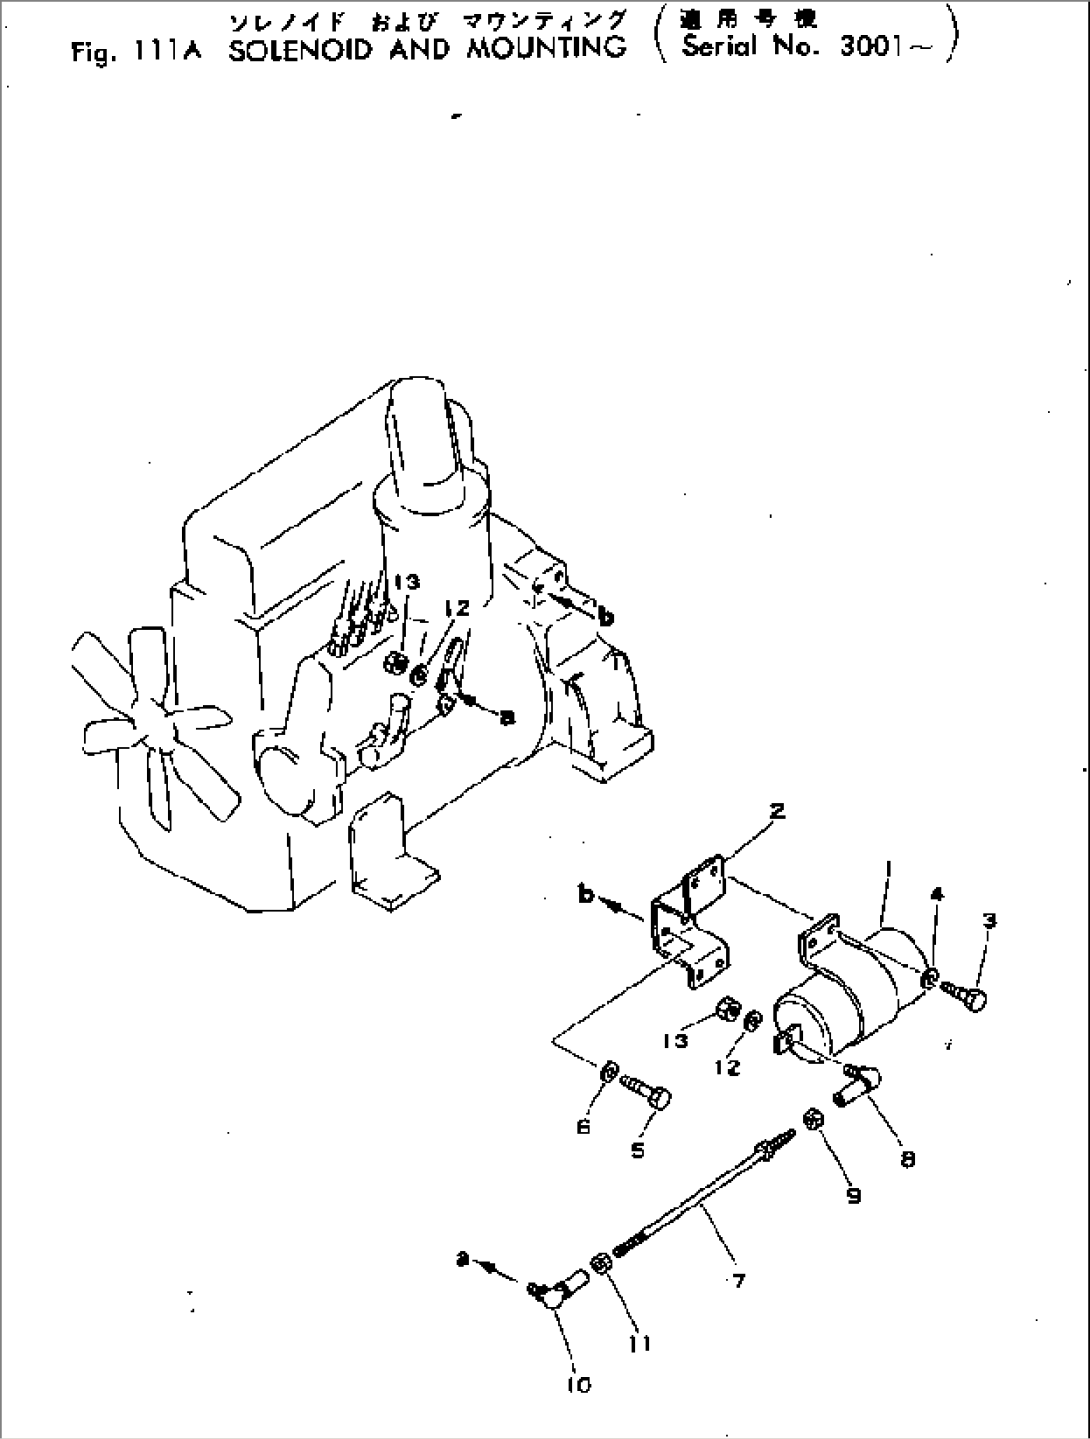 SOLENOID AND MOUNTING